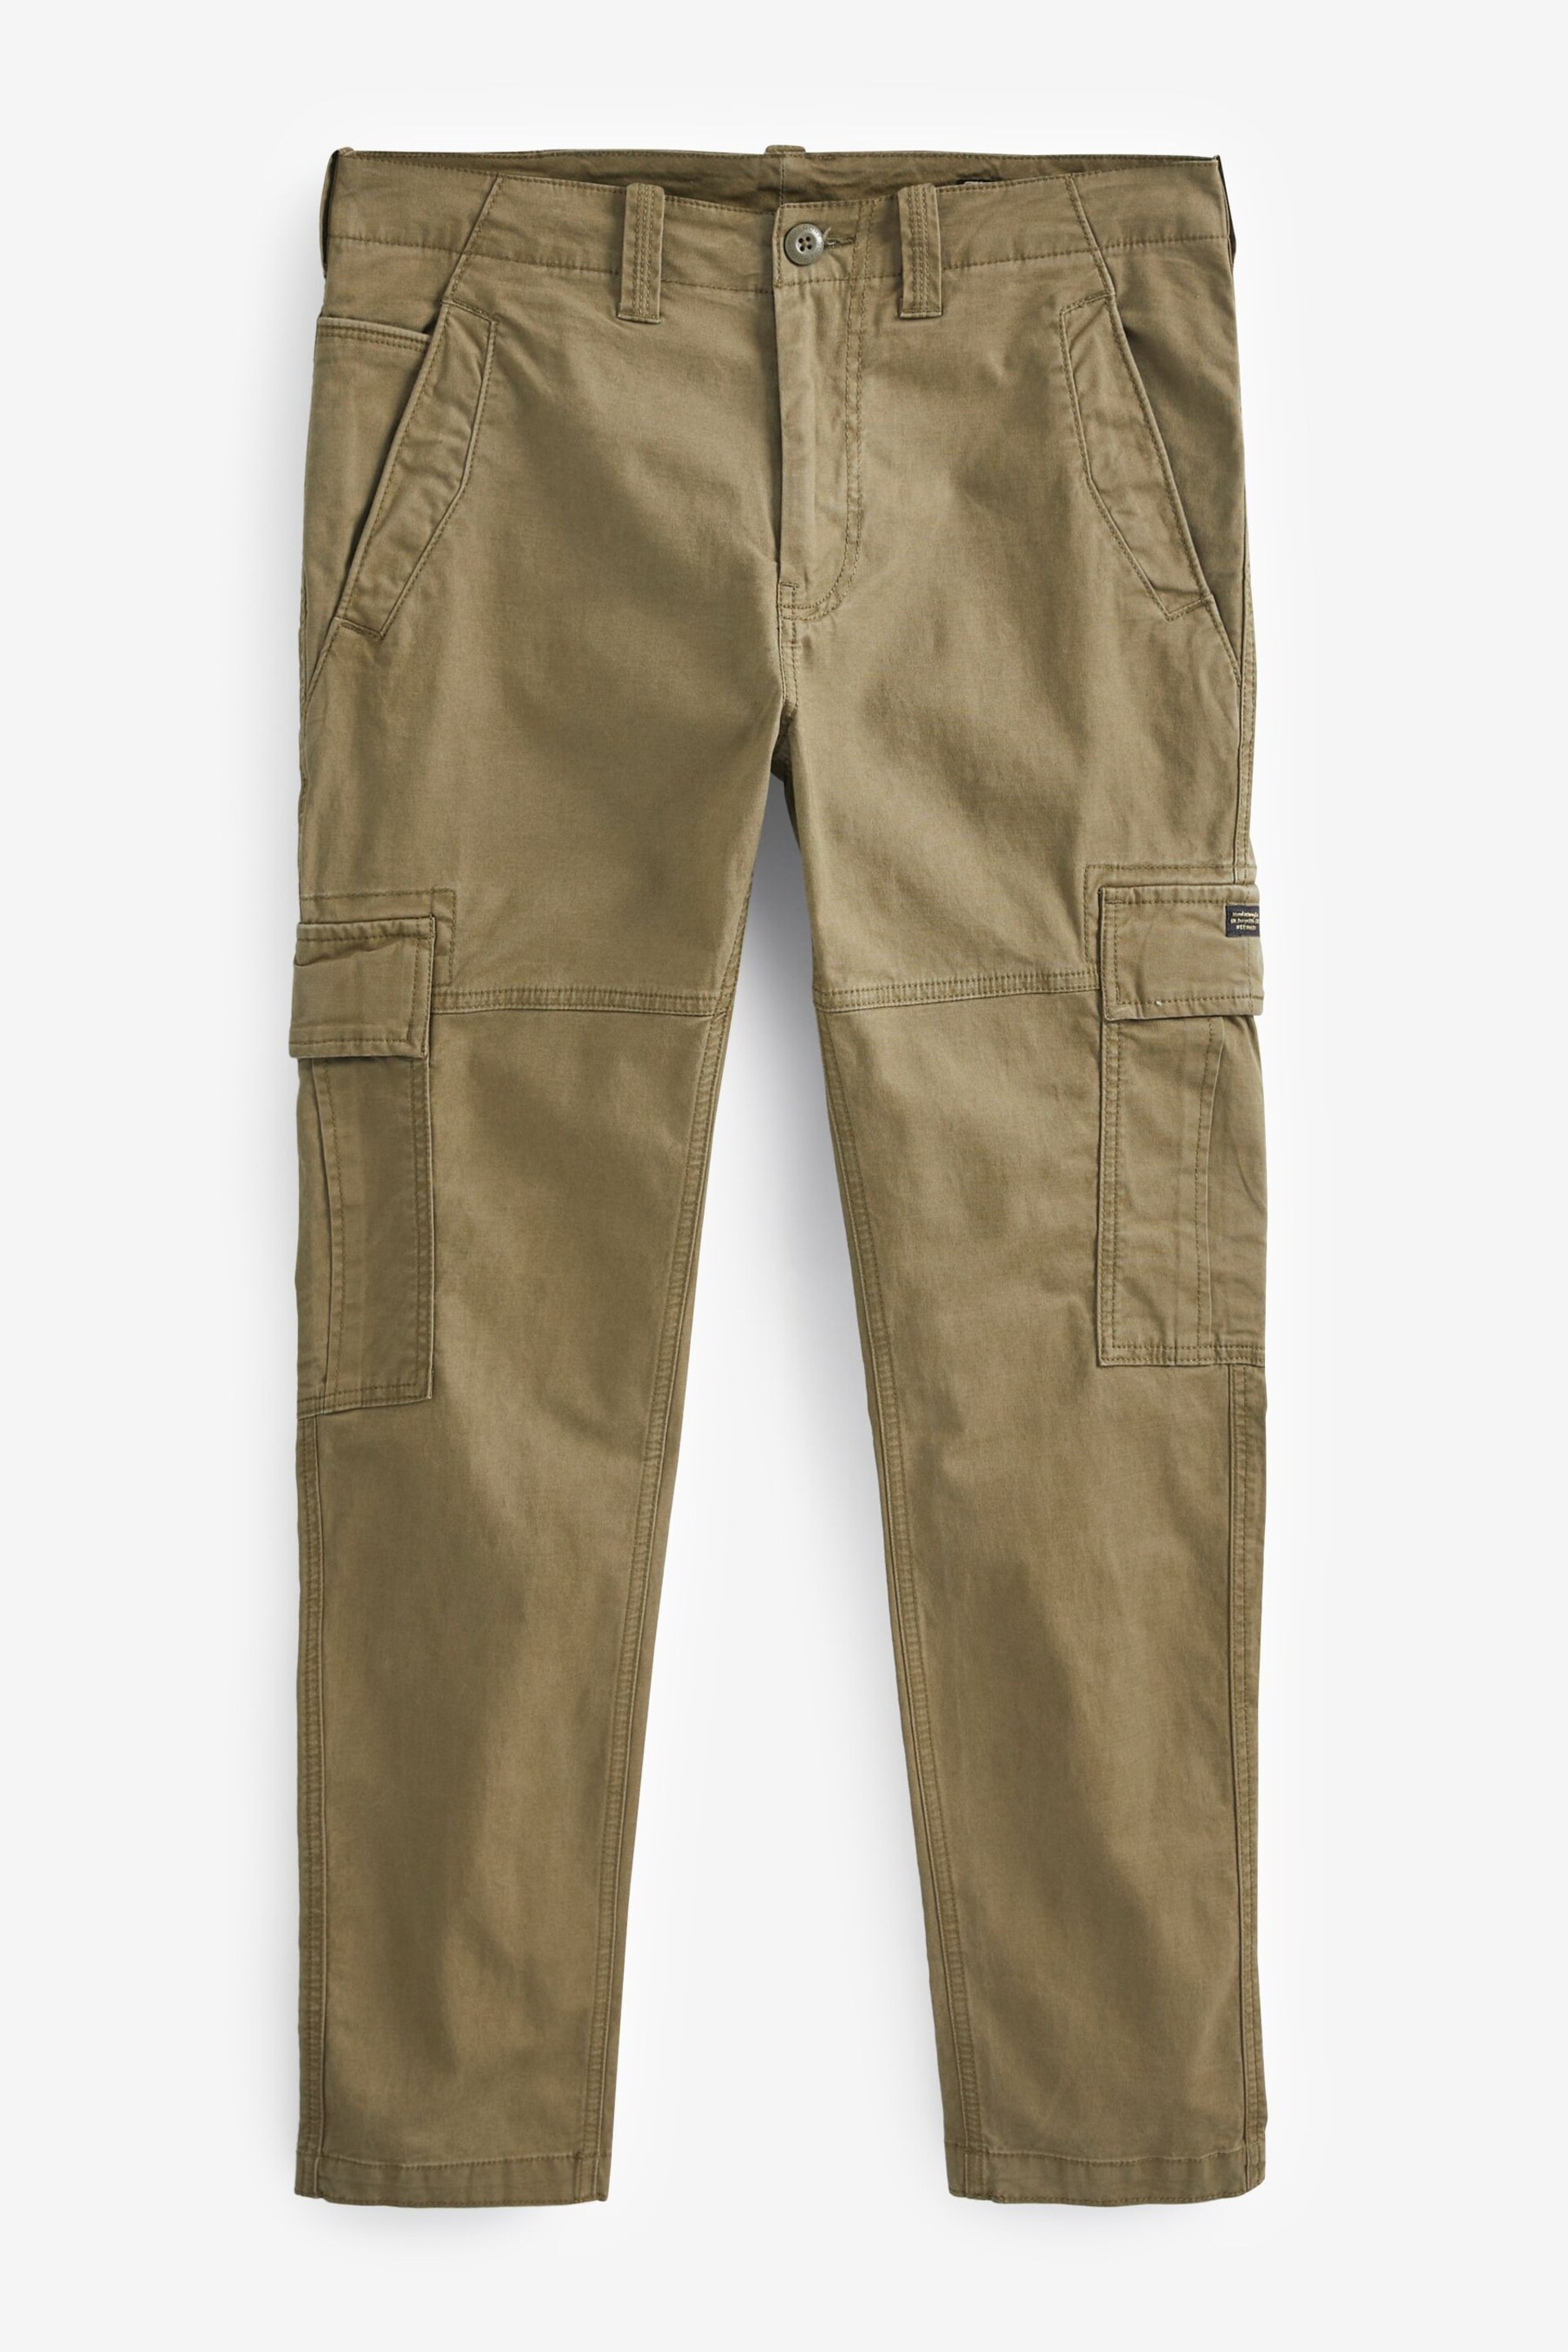 Superdry Khaki Green Core Cargo Utility Cargo Trousers - Image 5 of 6